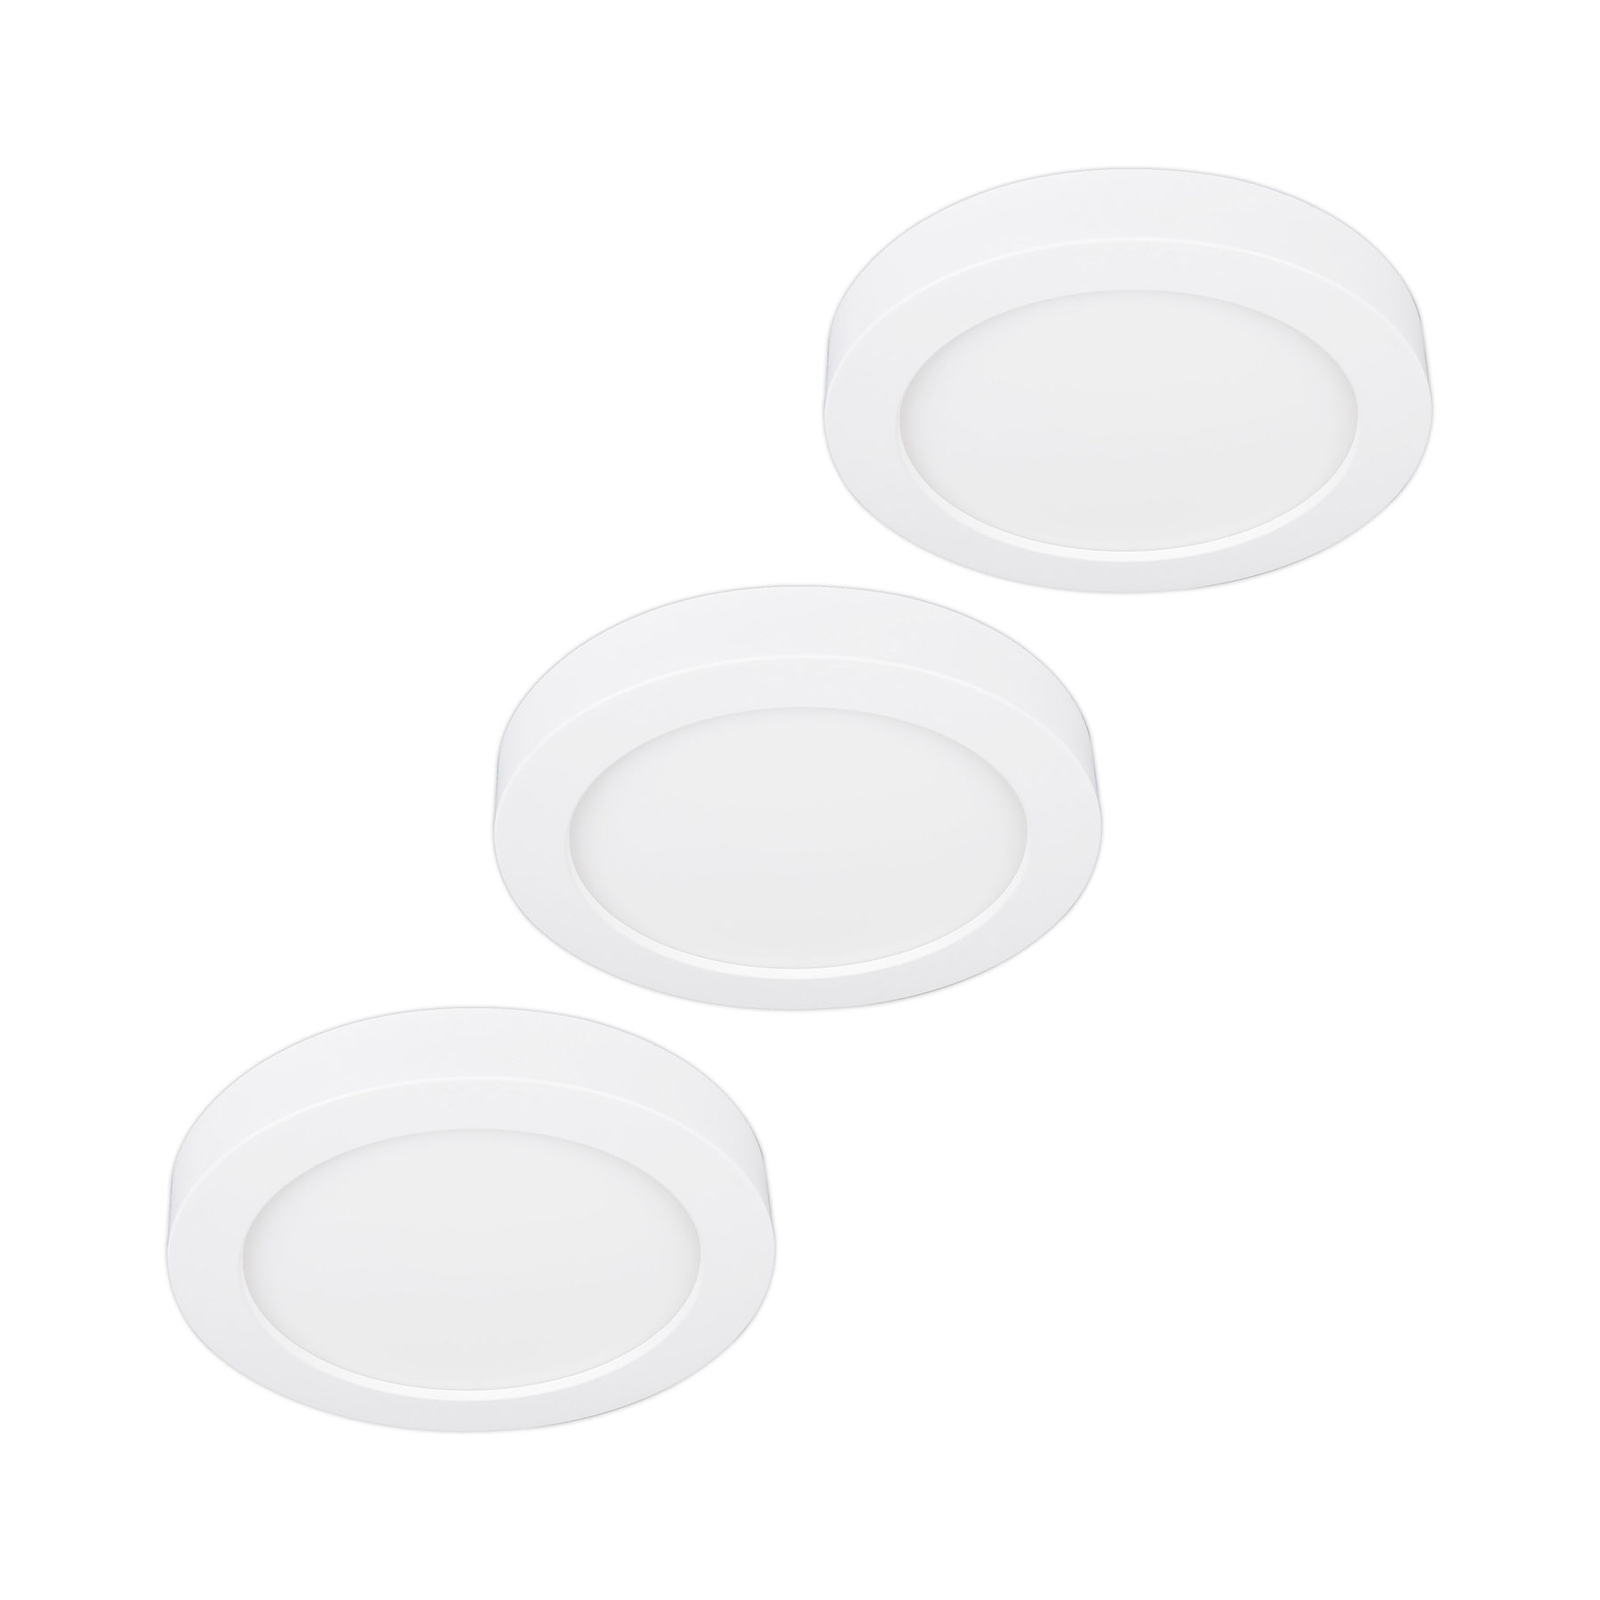 Prios LED ceiling lamp Edwina, white, 12.2cm 3pcs, dimmable